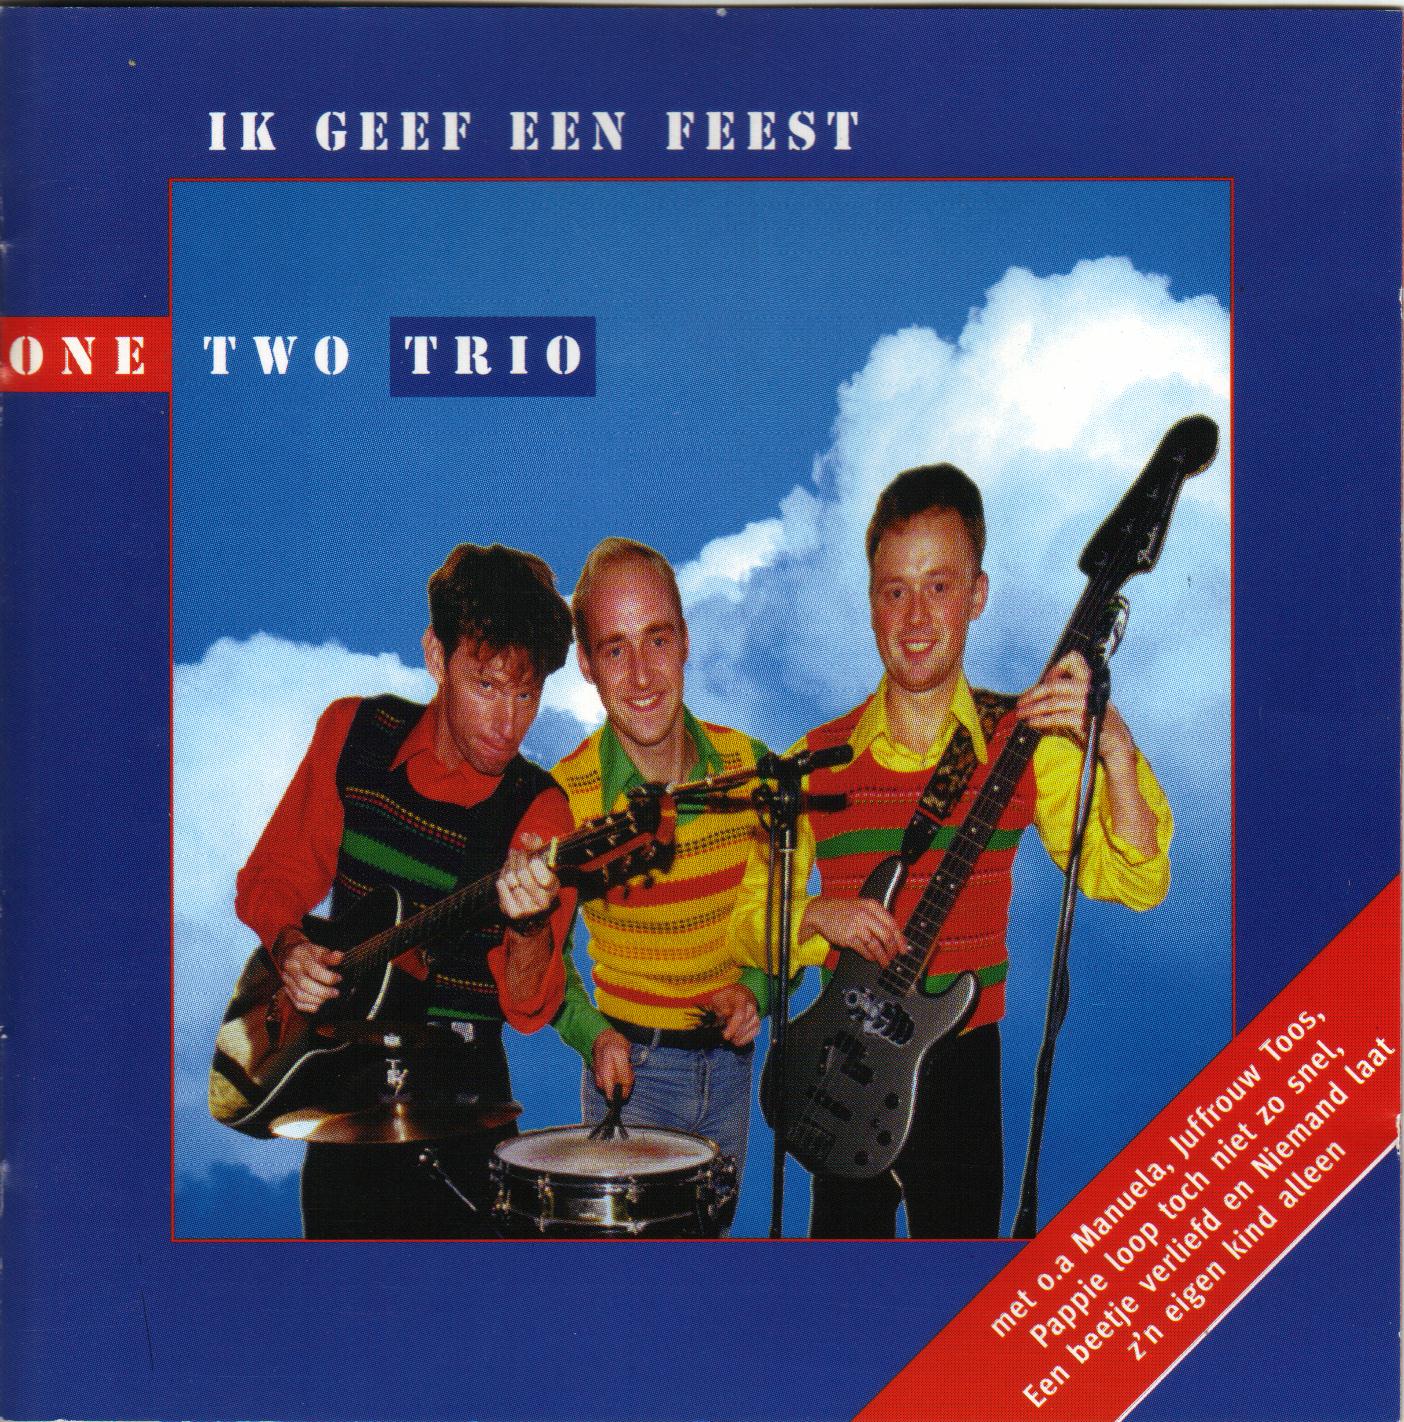 One Two Trio - 3 albums